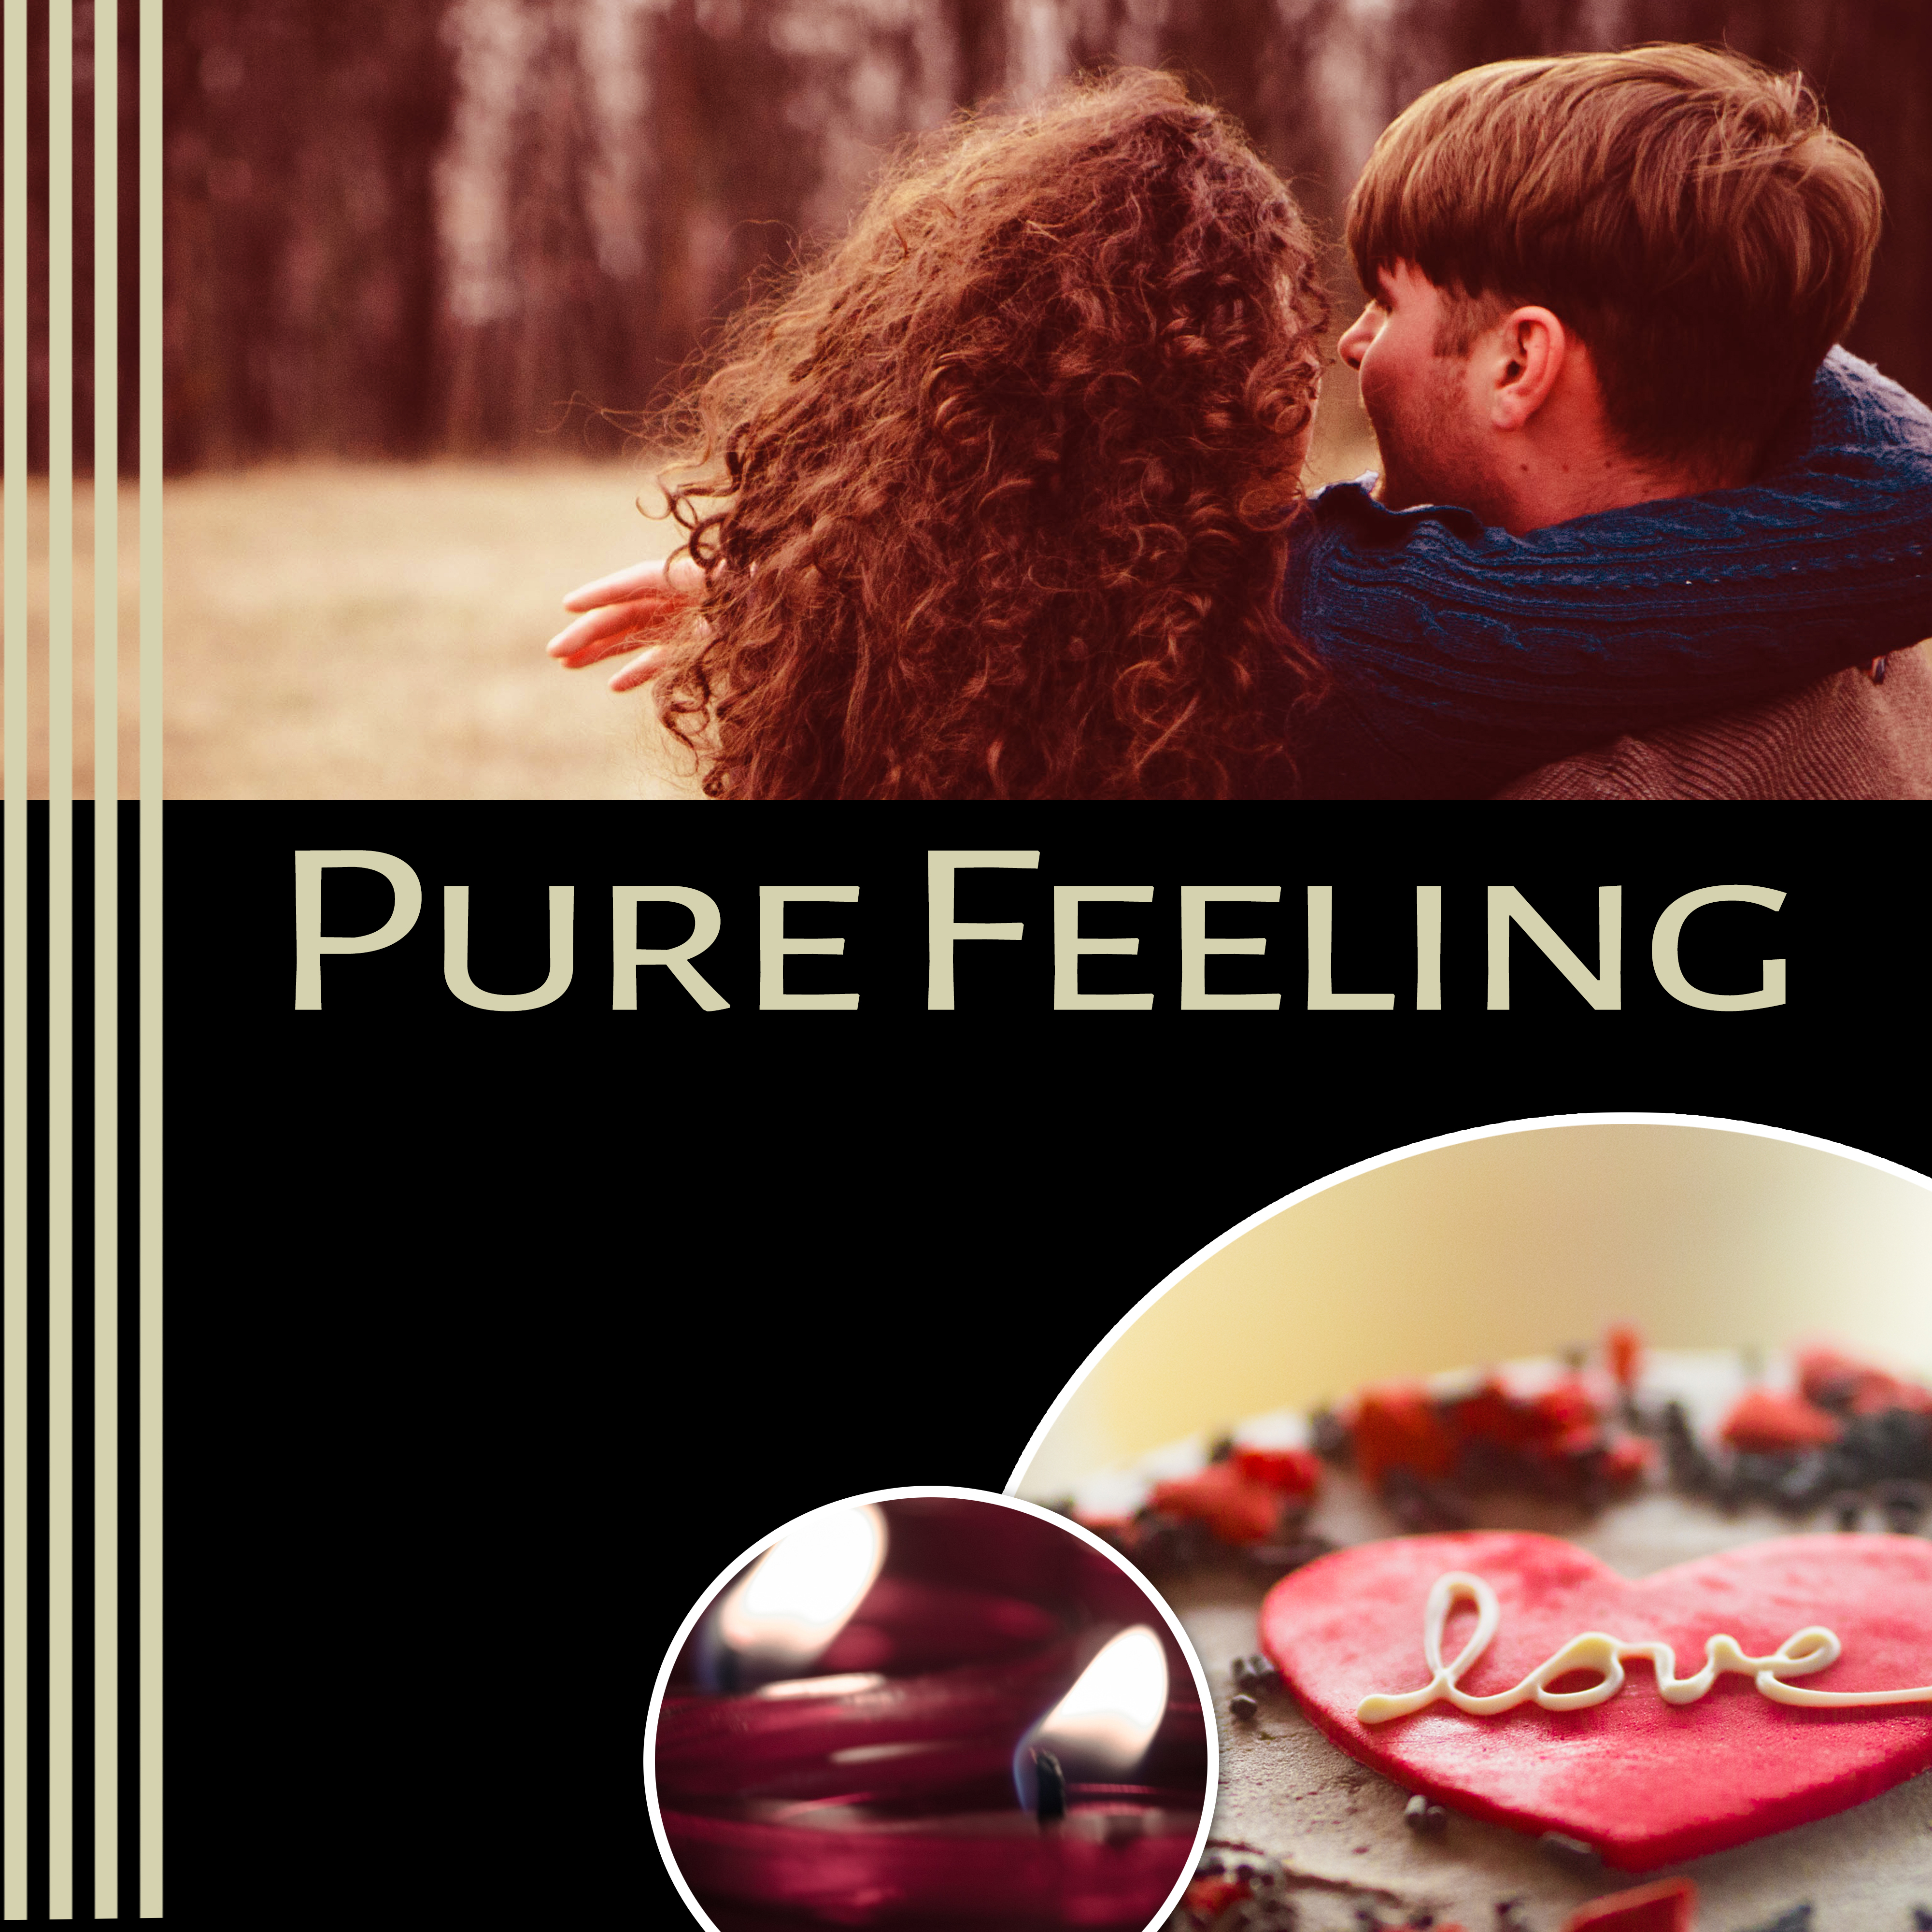 Pure Feeling – Sensual Jazz Music, True Love, Romantic Date, Relaxation Sounds for Lovers, Sensitive Gestures, Smooth Jazz